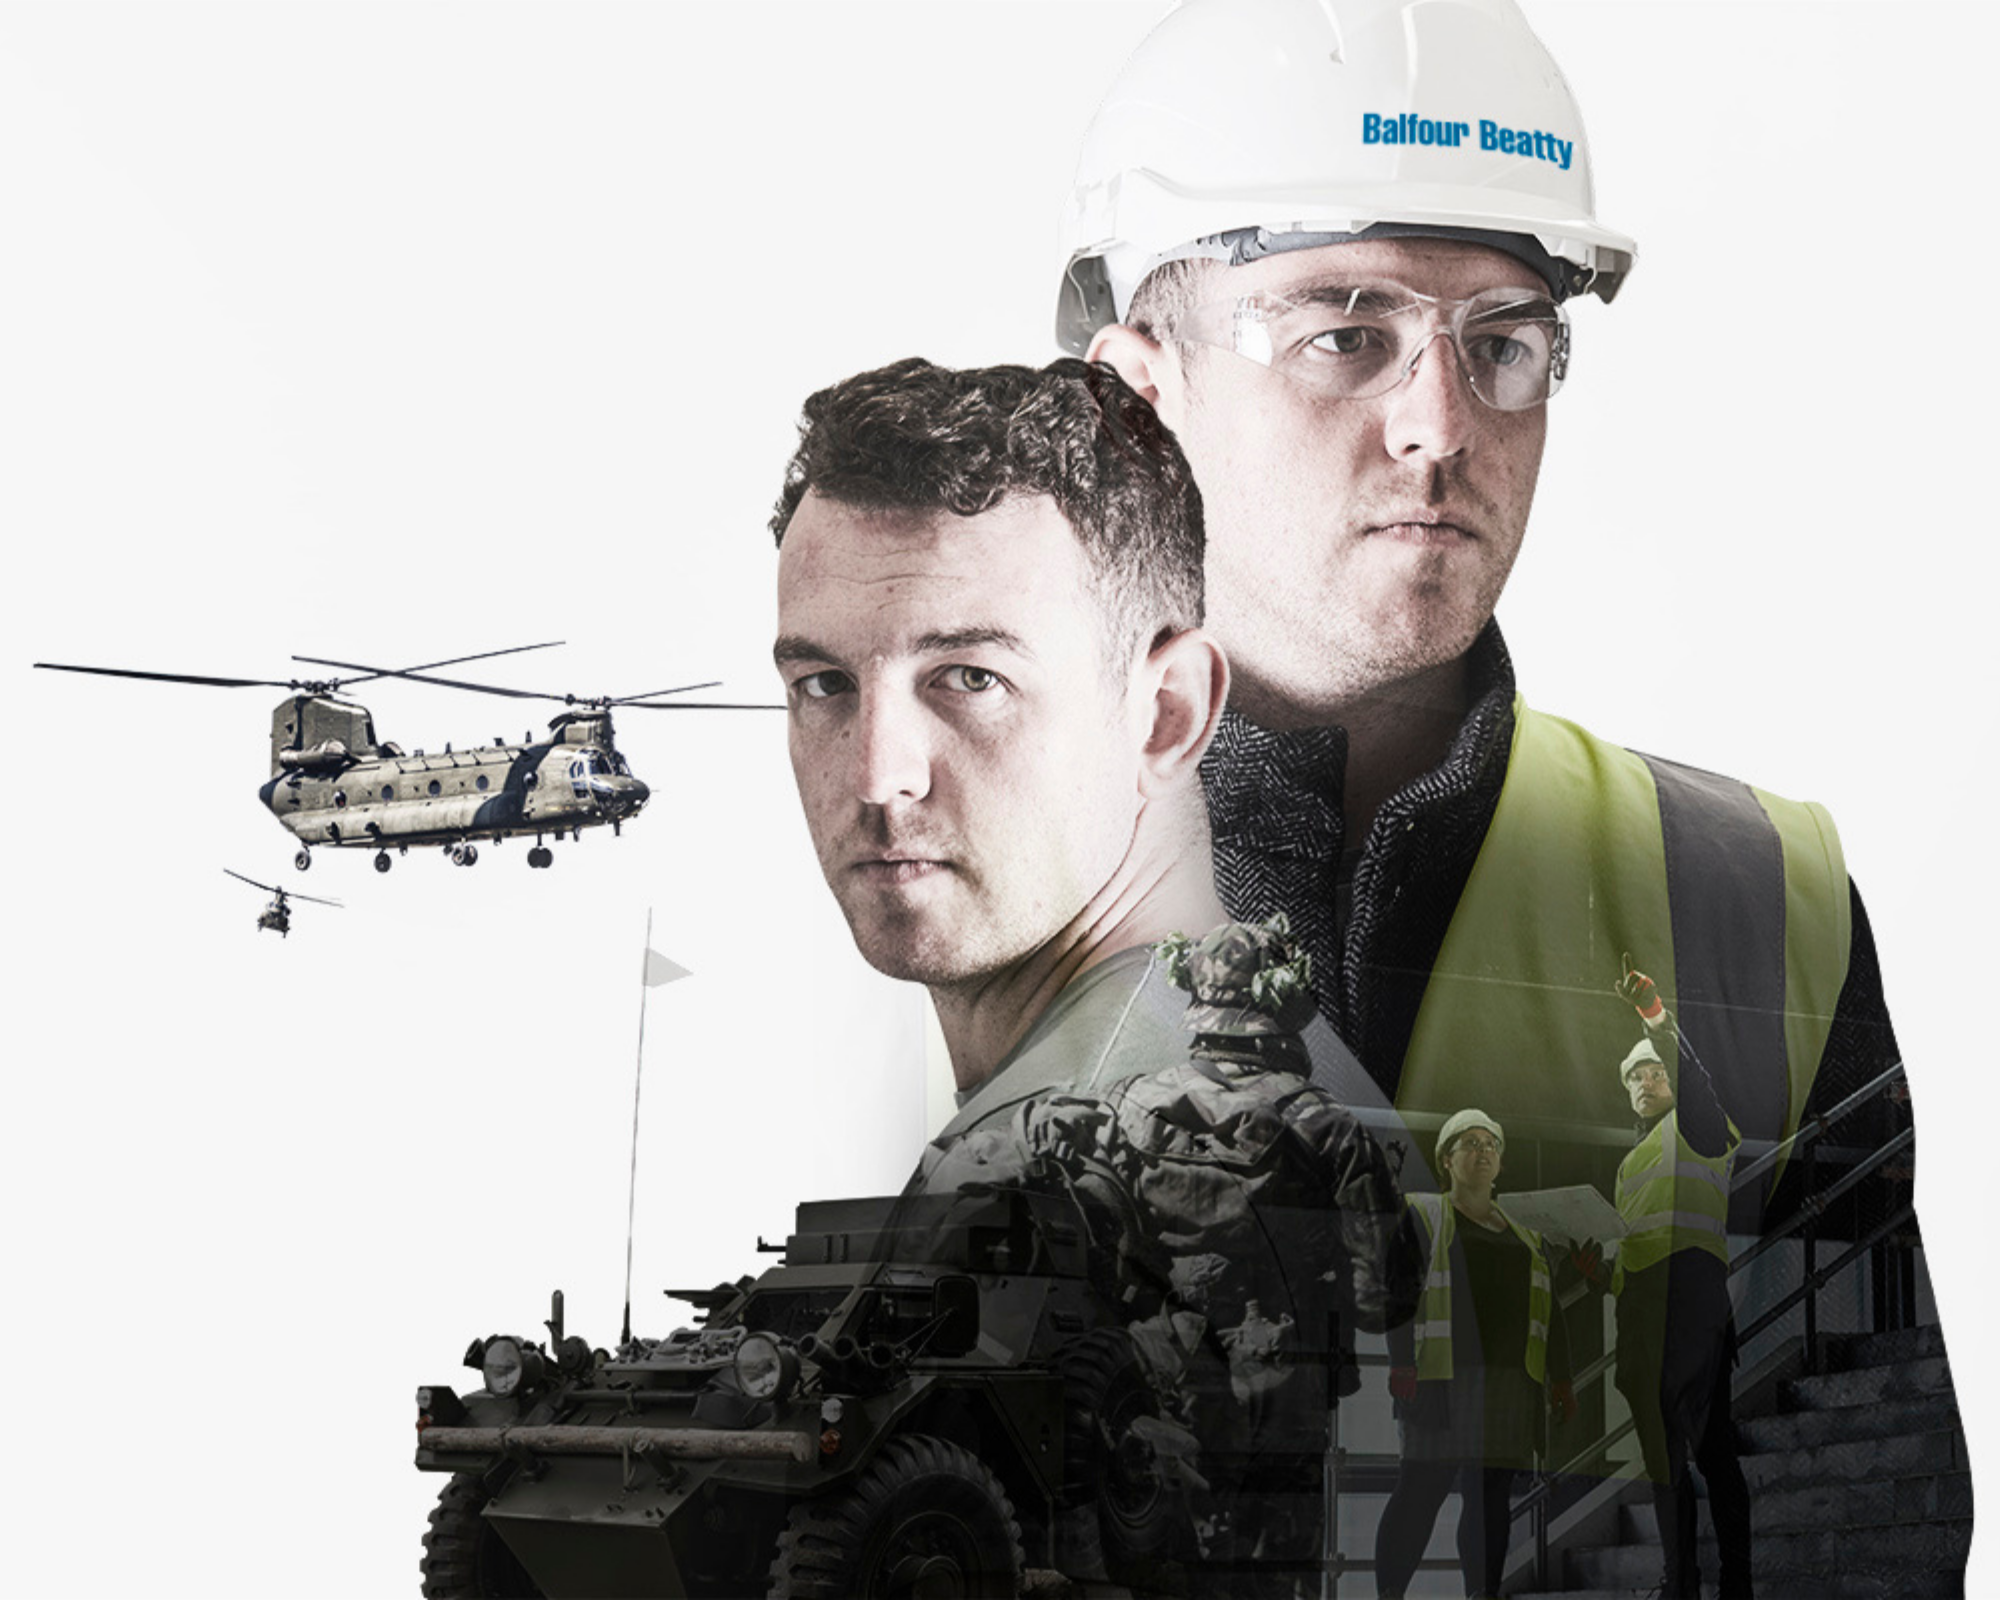 A Word from Our Sponsors – Balfour Beatty